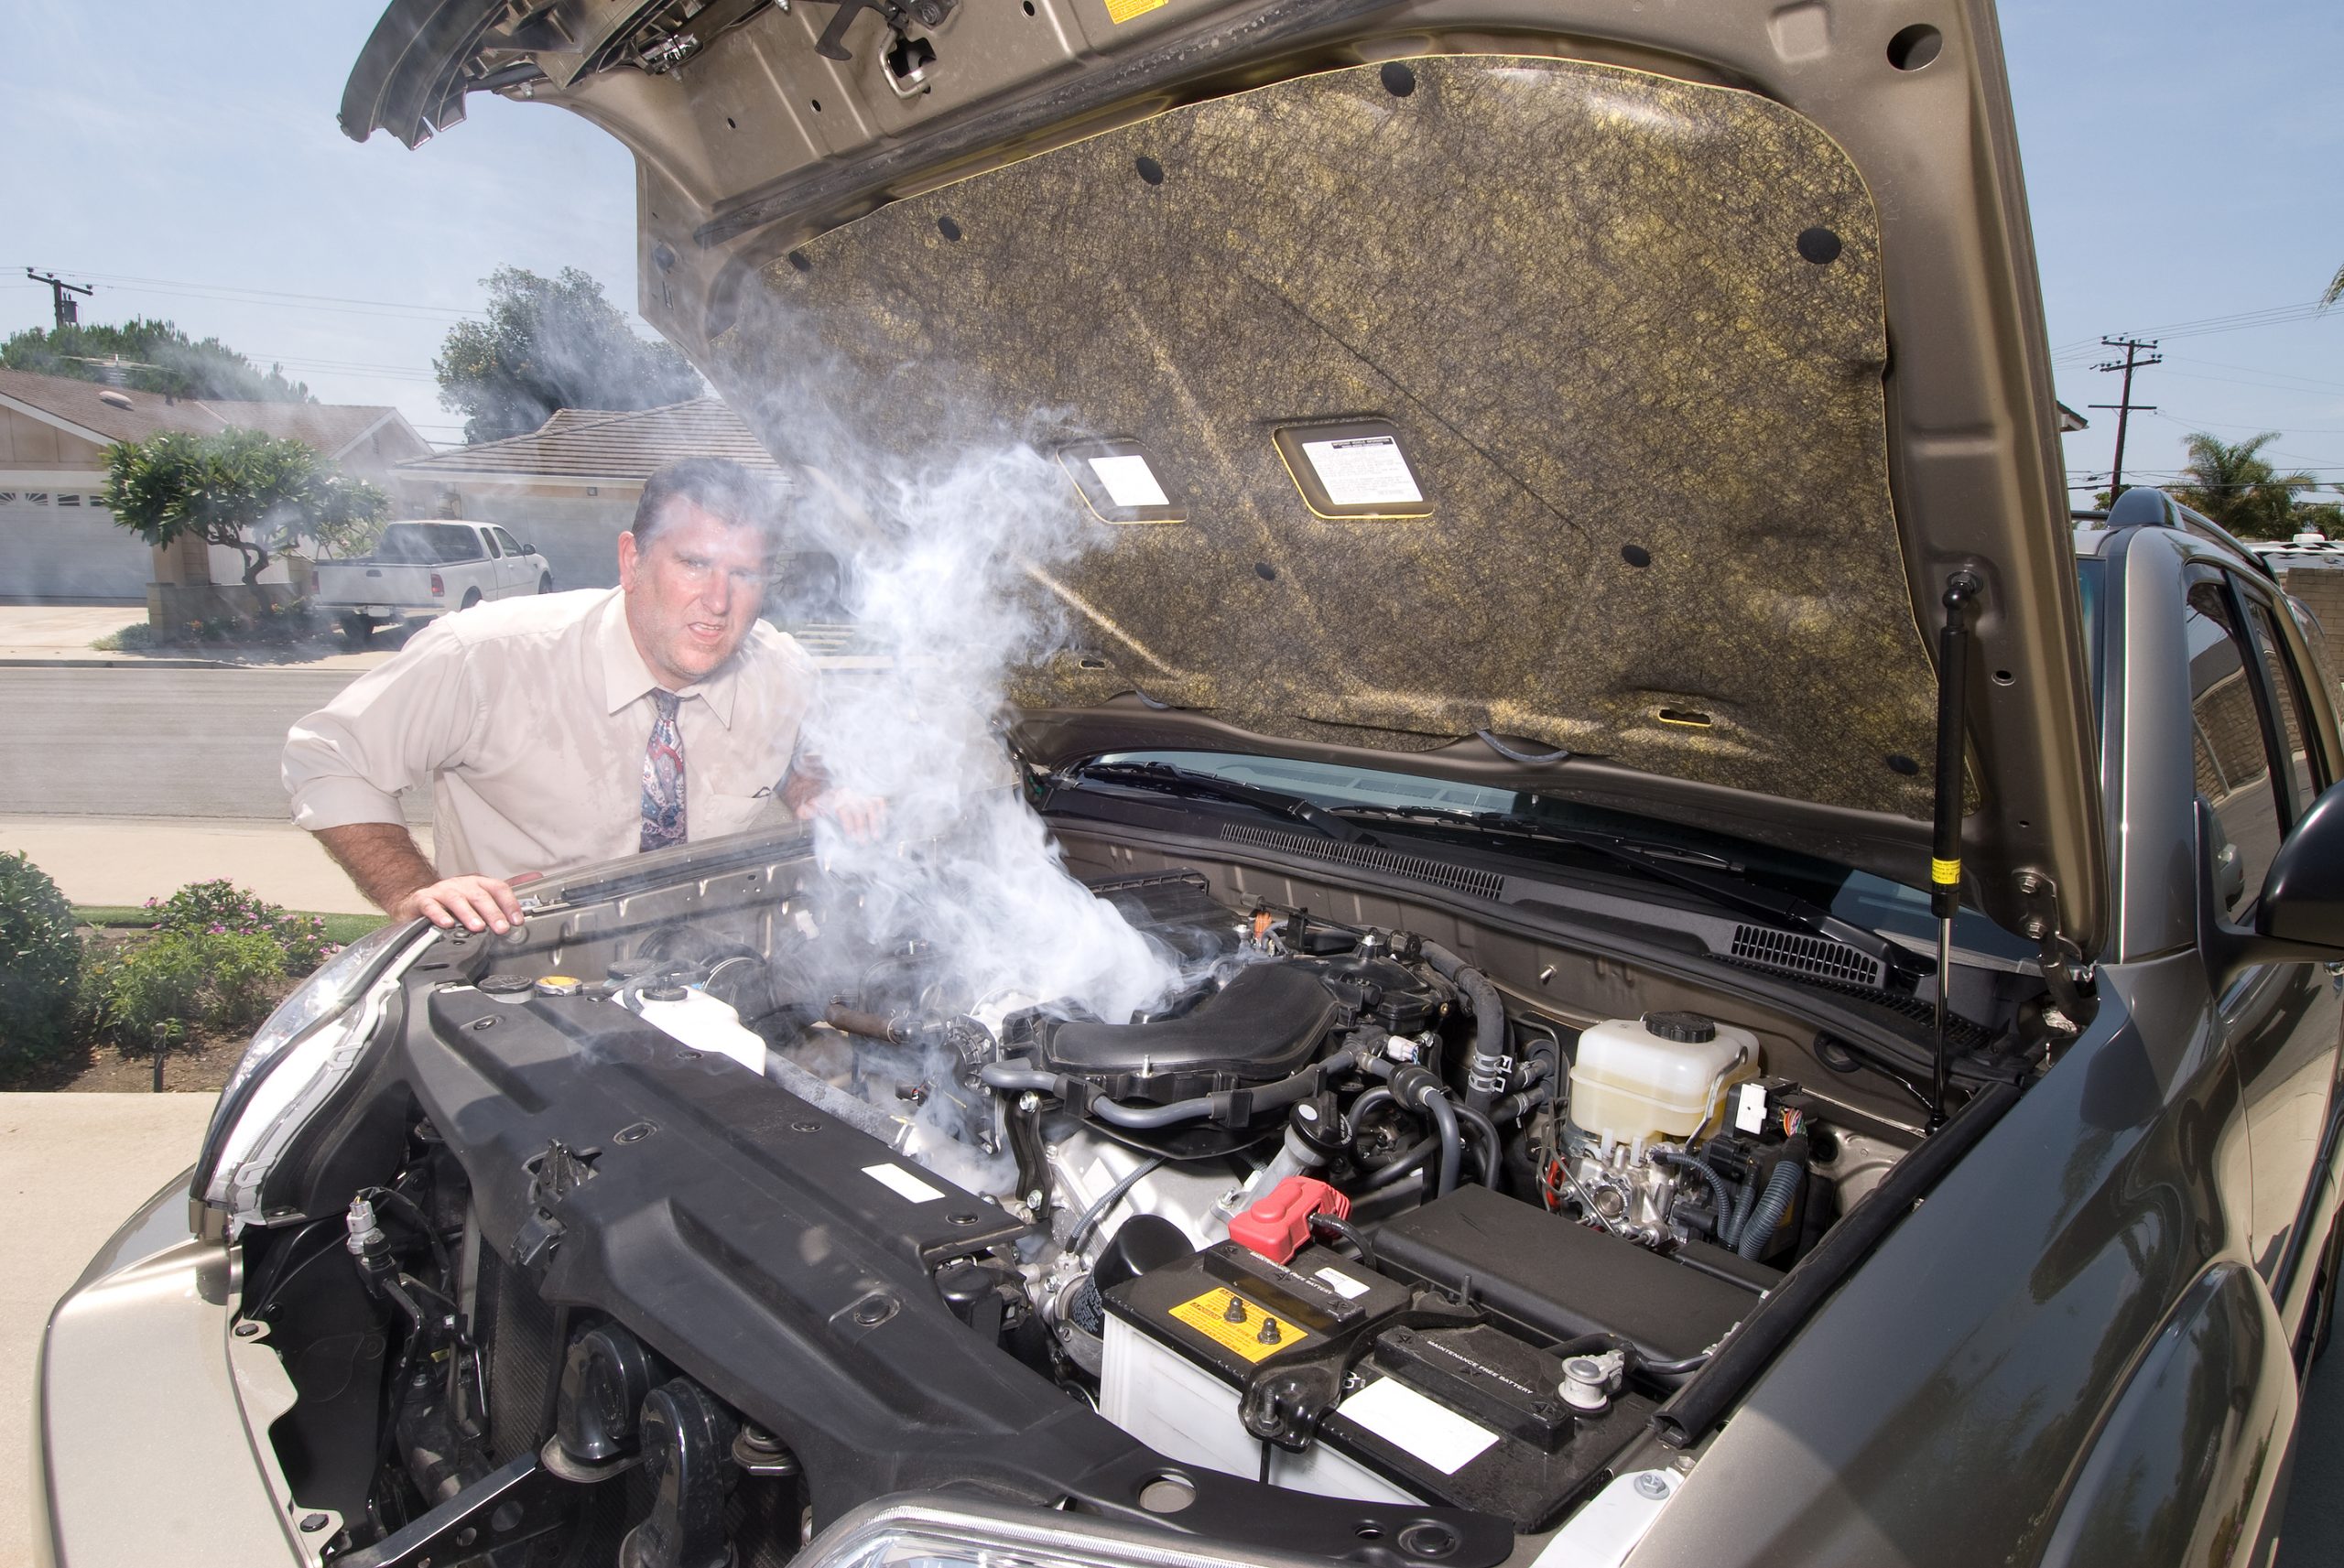 How Long Can a Car Overheat before Damage